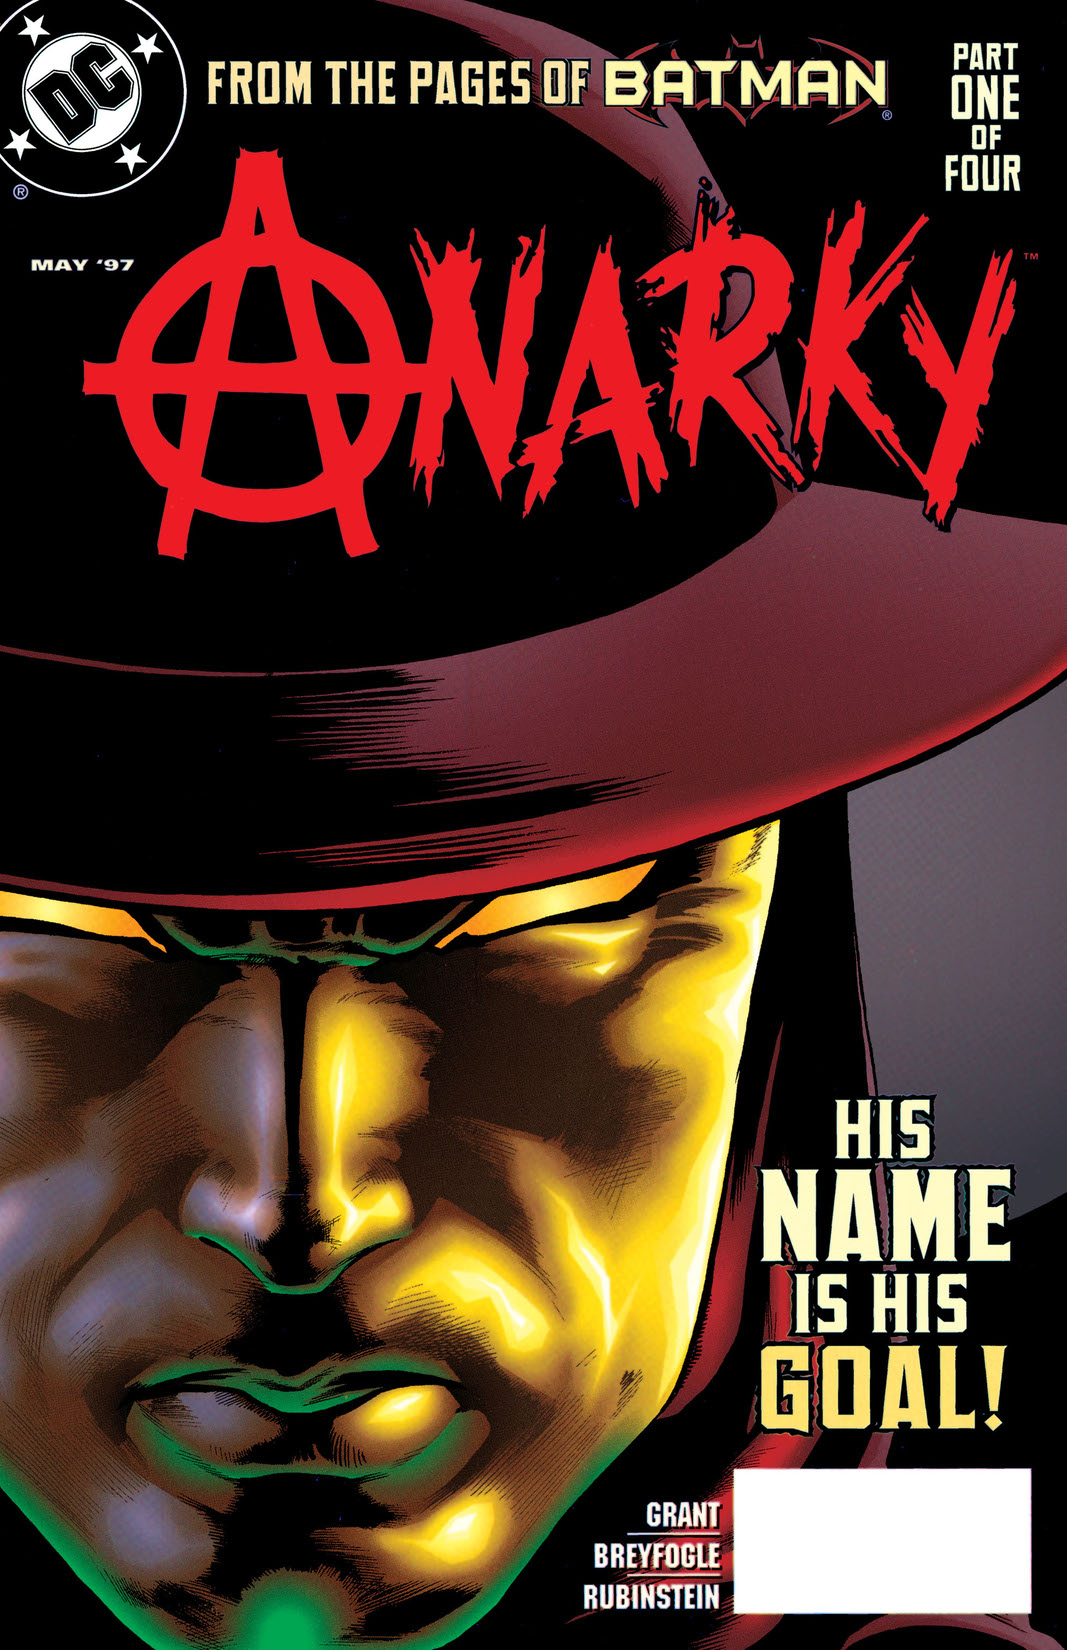 Anarky (1997-) #1 preview images